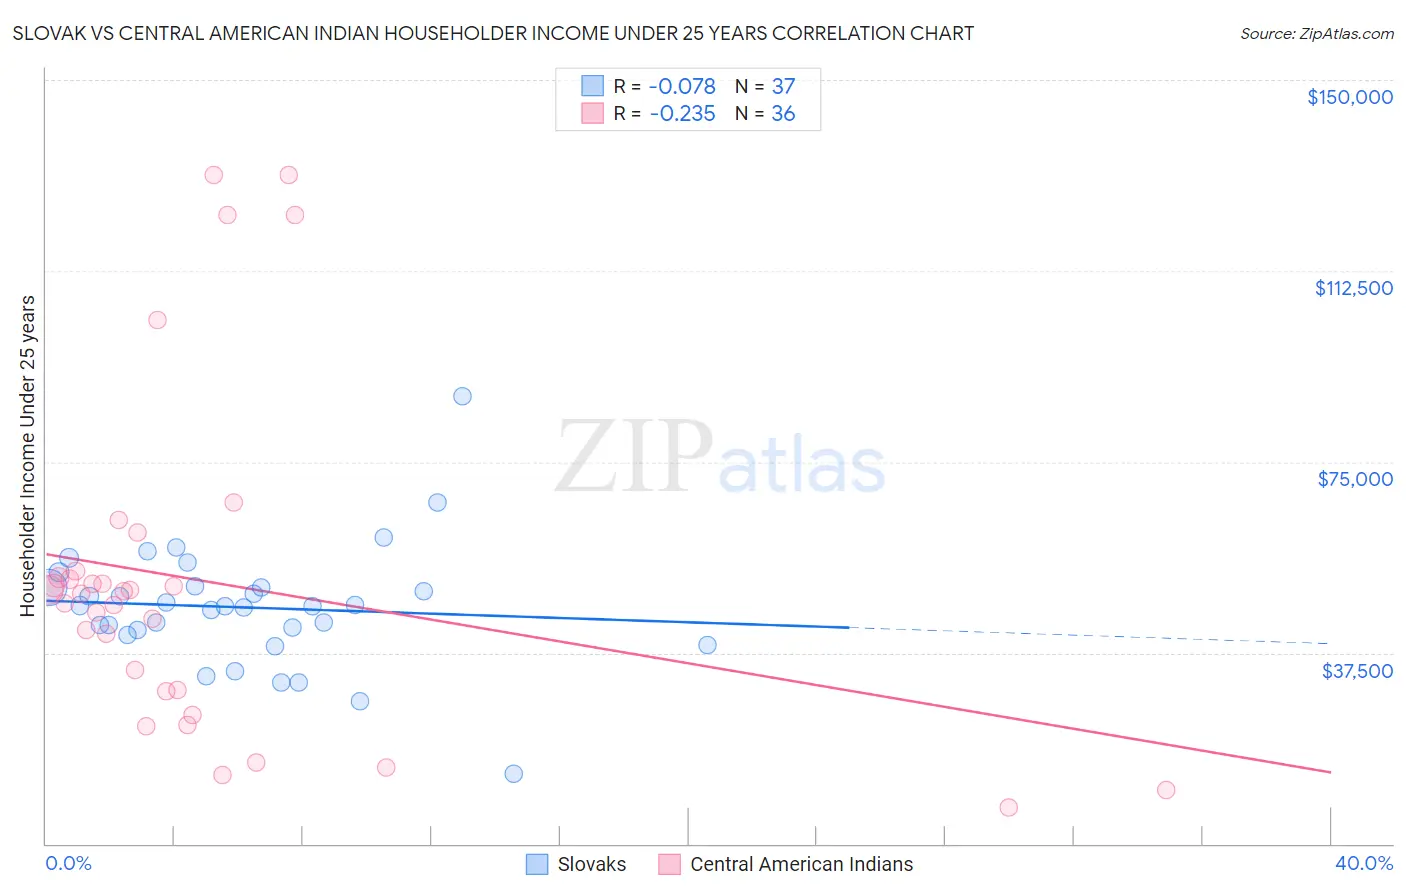 Slovak vs Central American Indian Householder Income Under 25 years